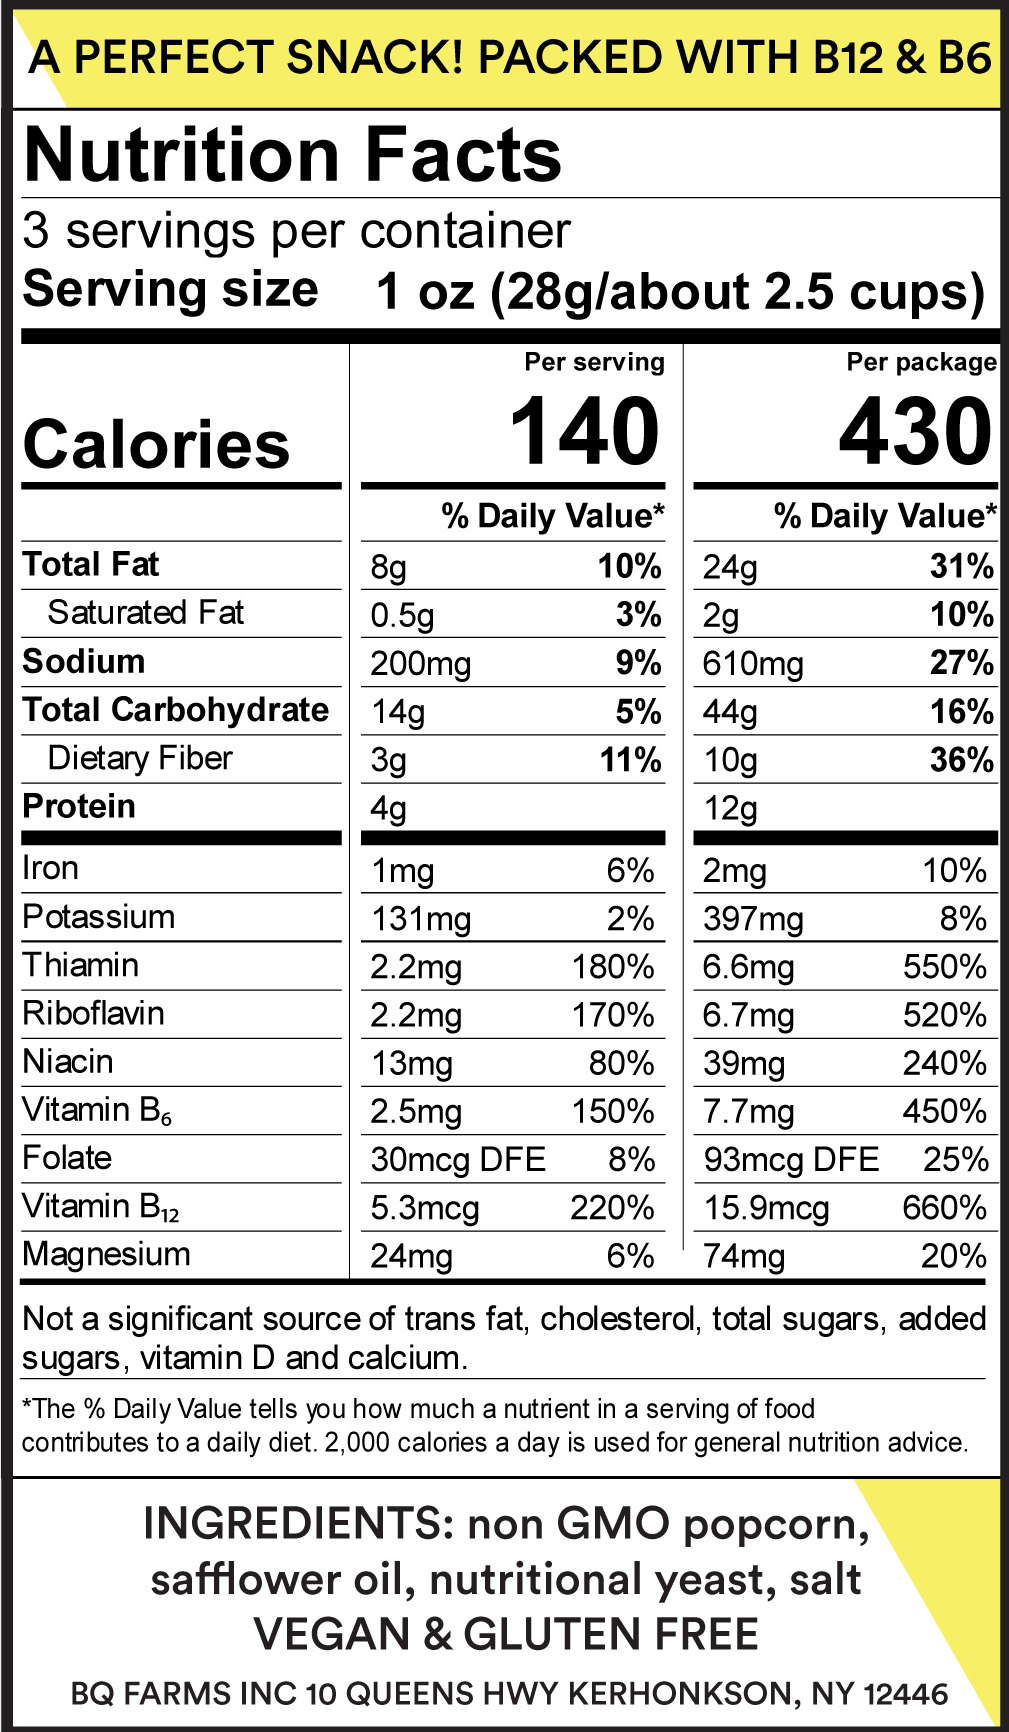 Image of BjornQorn classic 3oz nutritional label